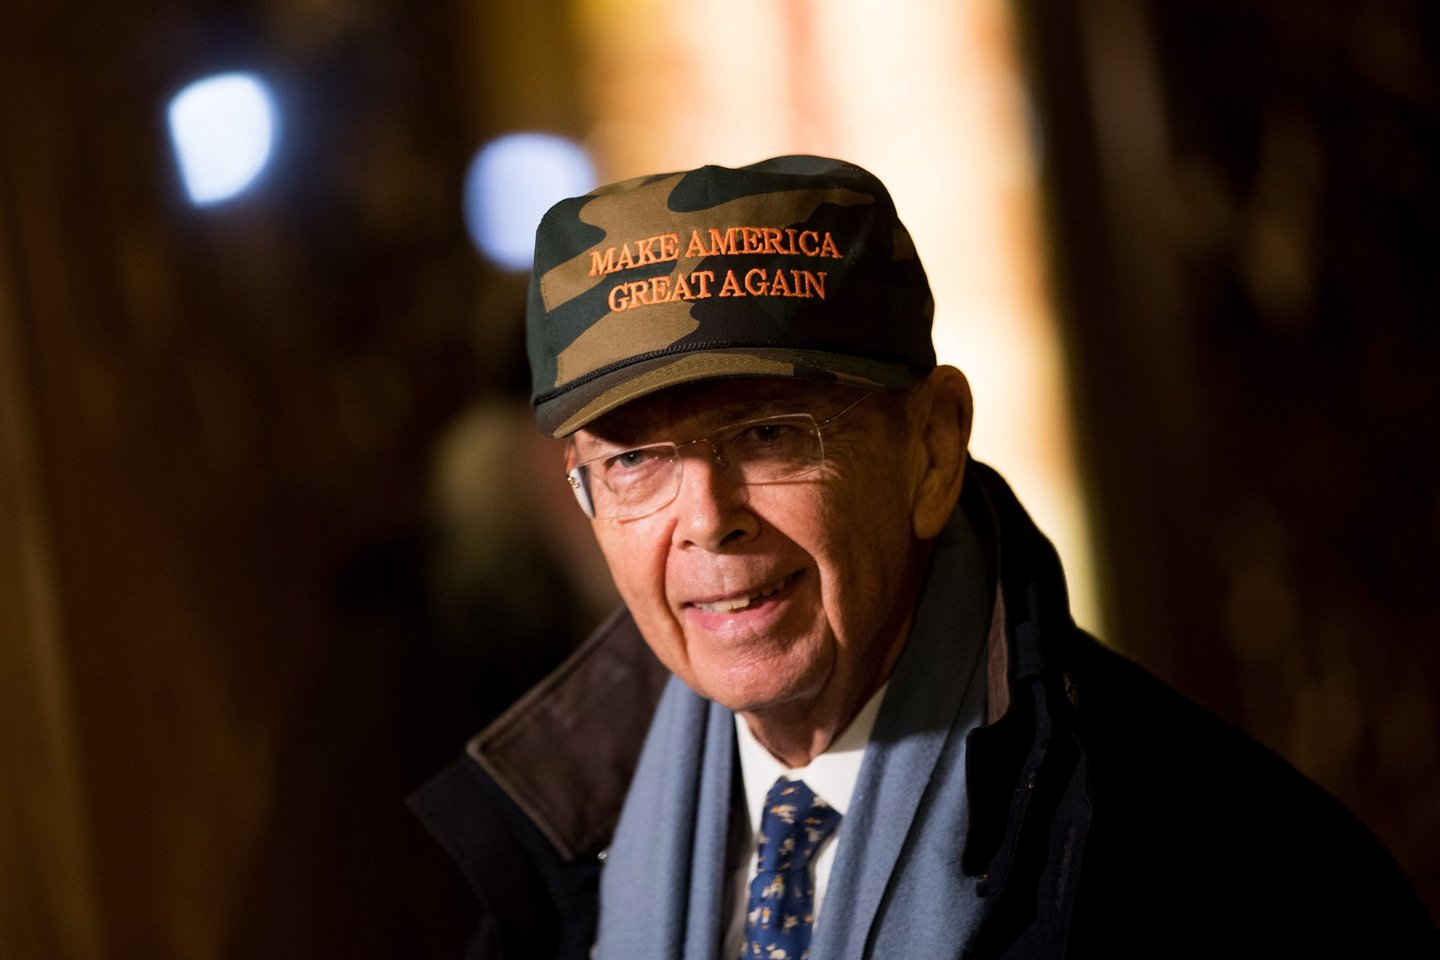 NEW YORK, NY - NOVEMBER 29: Wilbur Ross, President-elect Donald Trump's choice for Commerce Secretary, wears a 'Make America Great Again Hat' as he speaks briefly to reporters at Trump Tower, November 29, 2016 in New York City. President-elect Donald Trump and his transition team are in the process of filling cabinet and other high level positions for the new administration. (Photo by Drew Angerer/Getty Images)